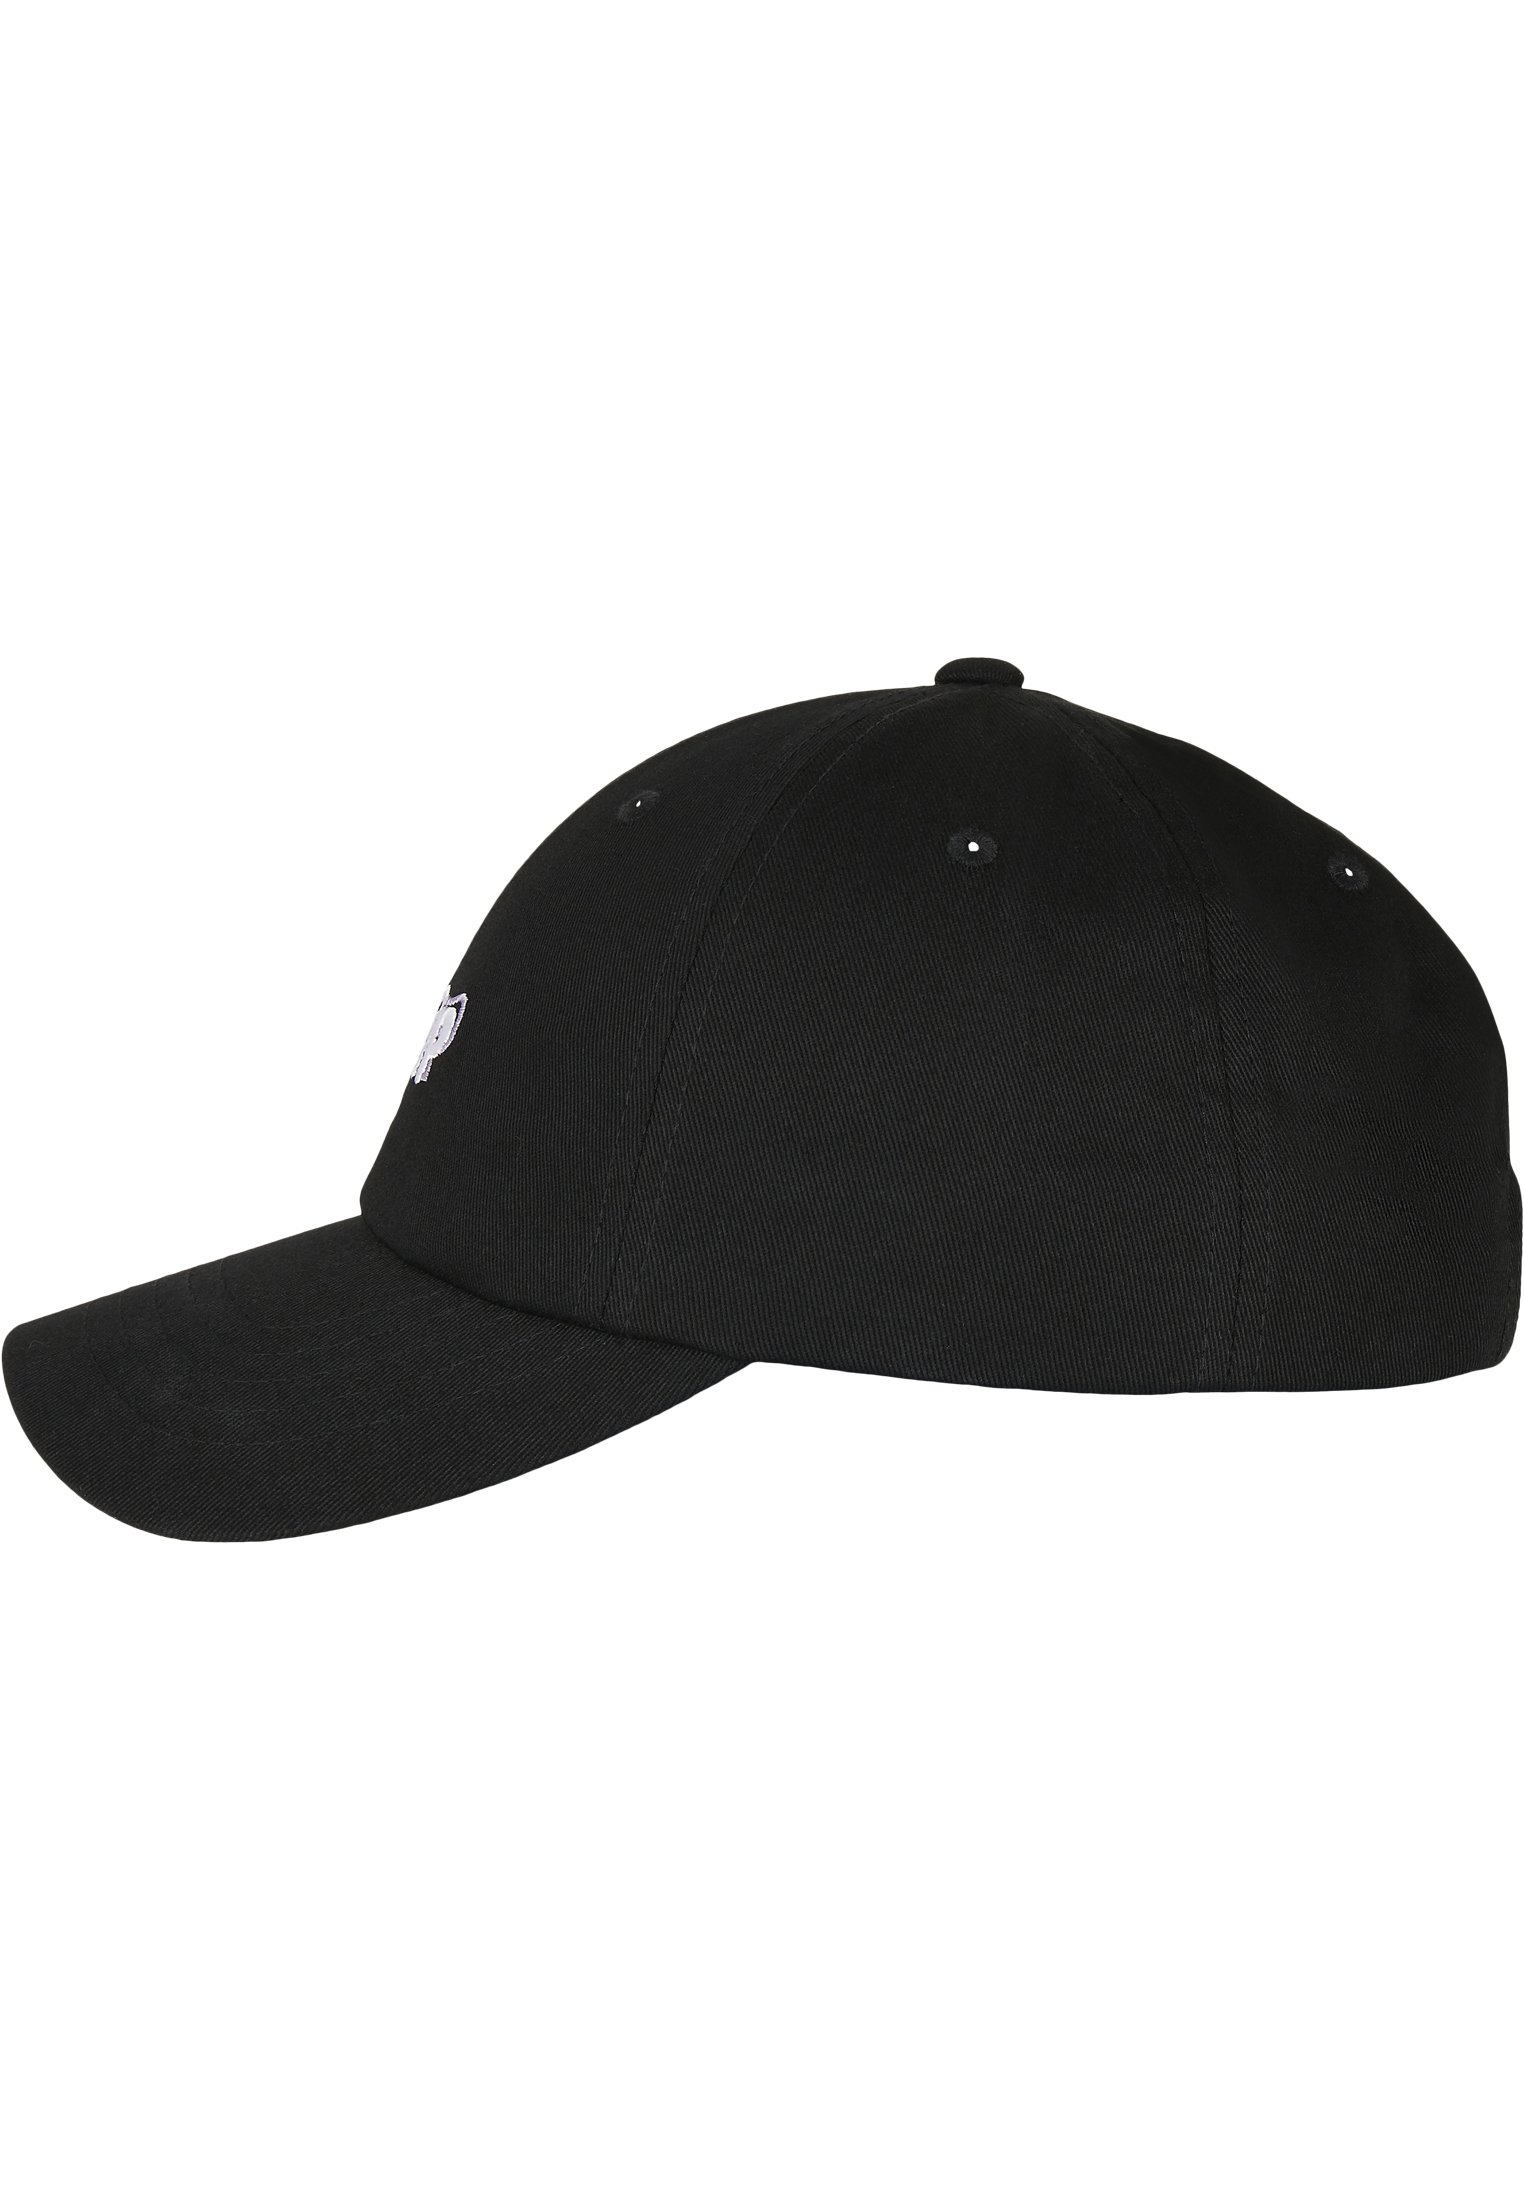 C&S WLPossible Deformation Curved Cap black/mc one size